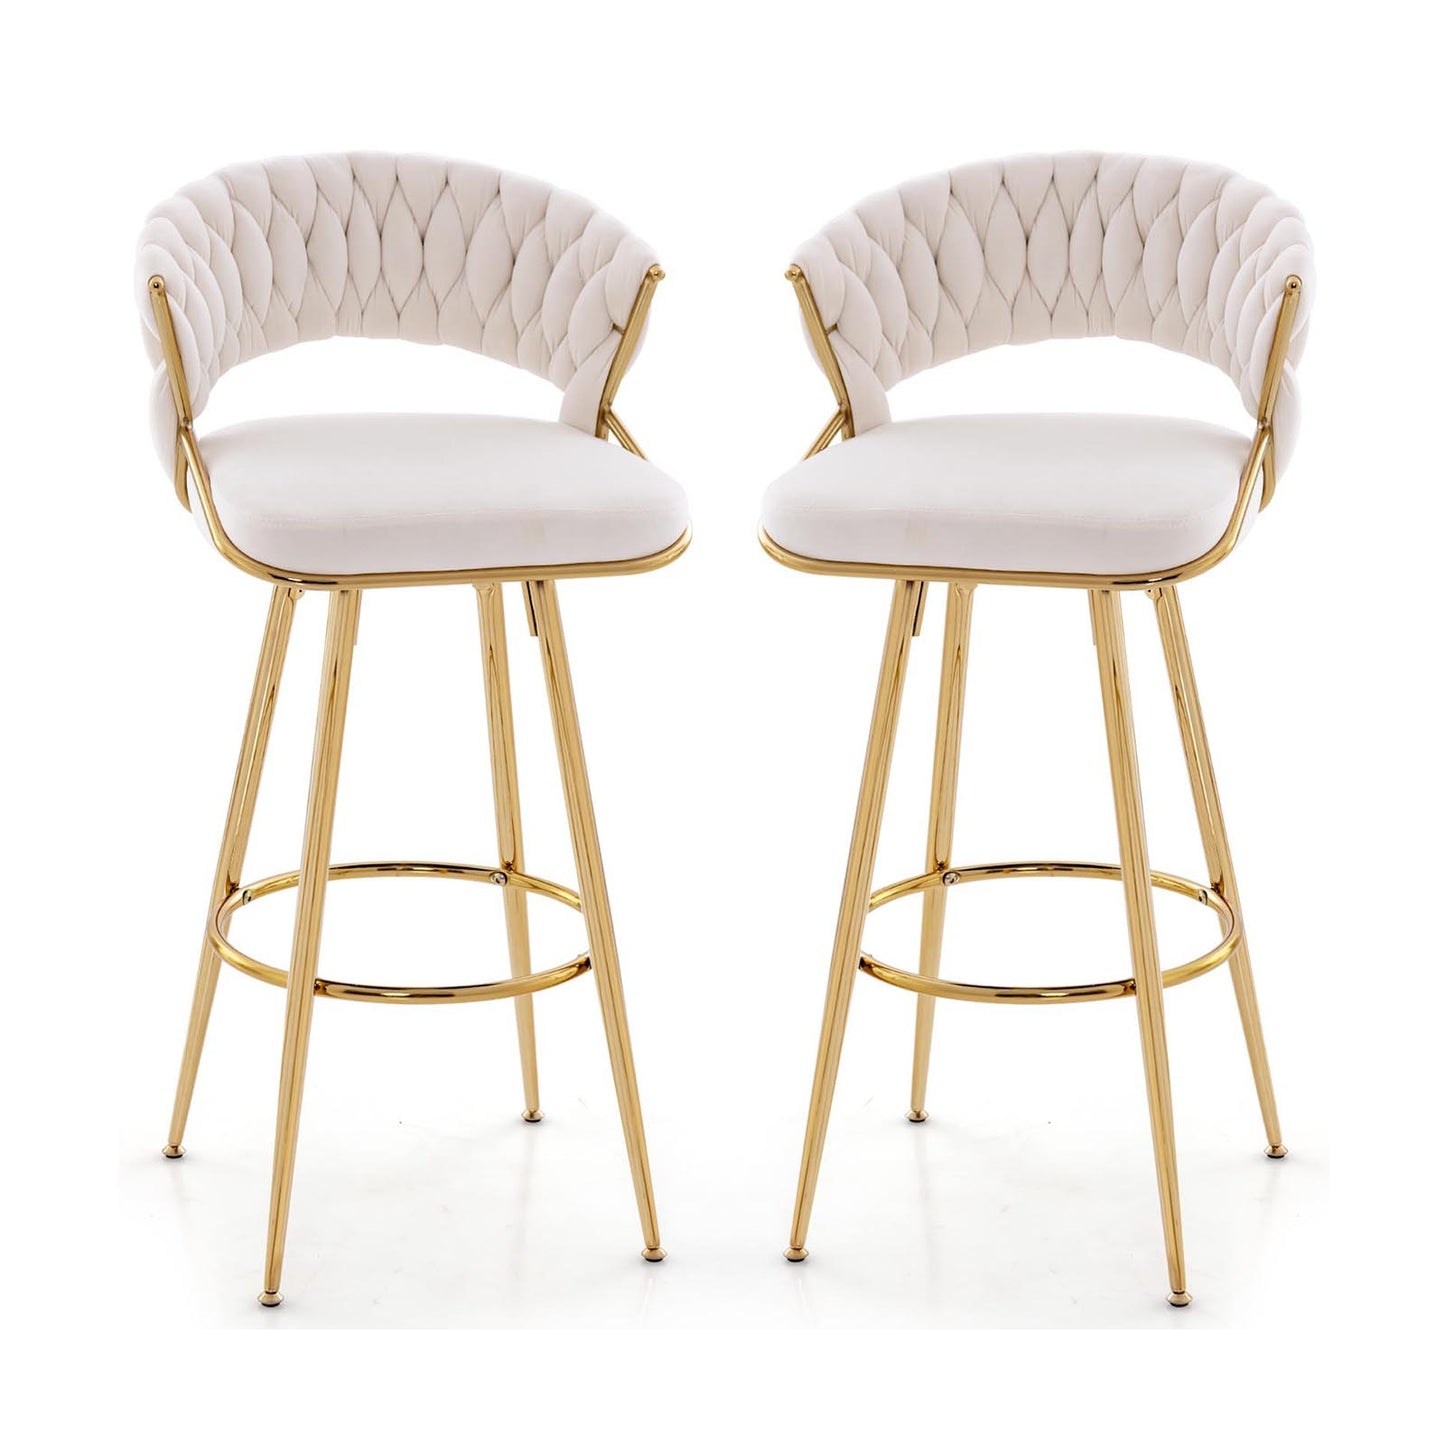 29 Inch Velvet Bar Stool Set of 2 with Woven Backrest and Gold Metal Legs-Beige